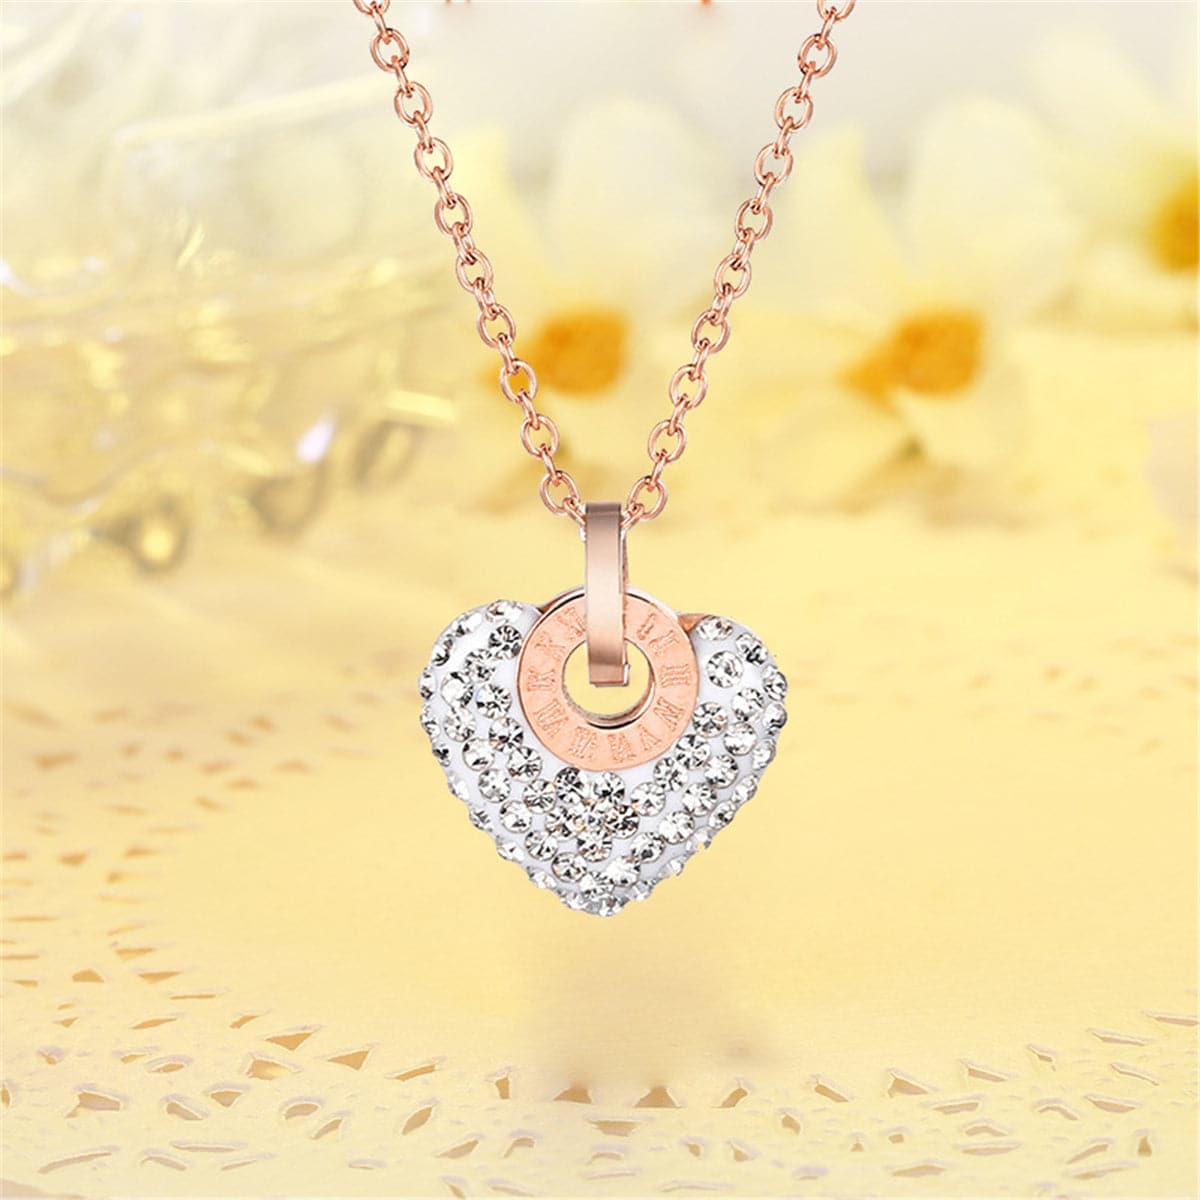 Cubic Zirconia & 18K Rose Gold-Plated Roman Numeral Heart Pendant Necklace